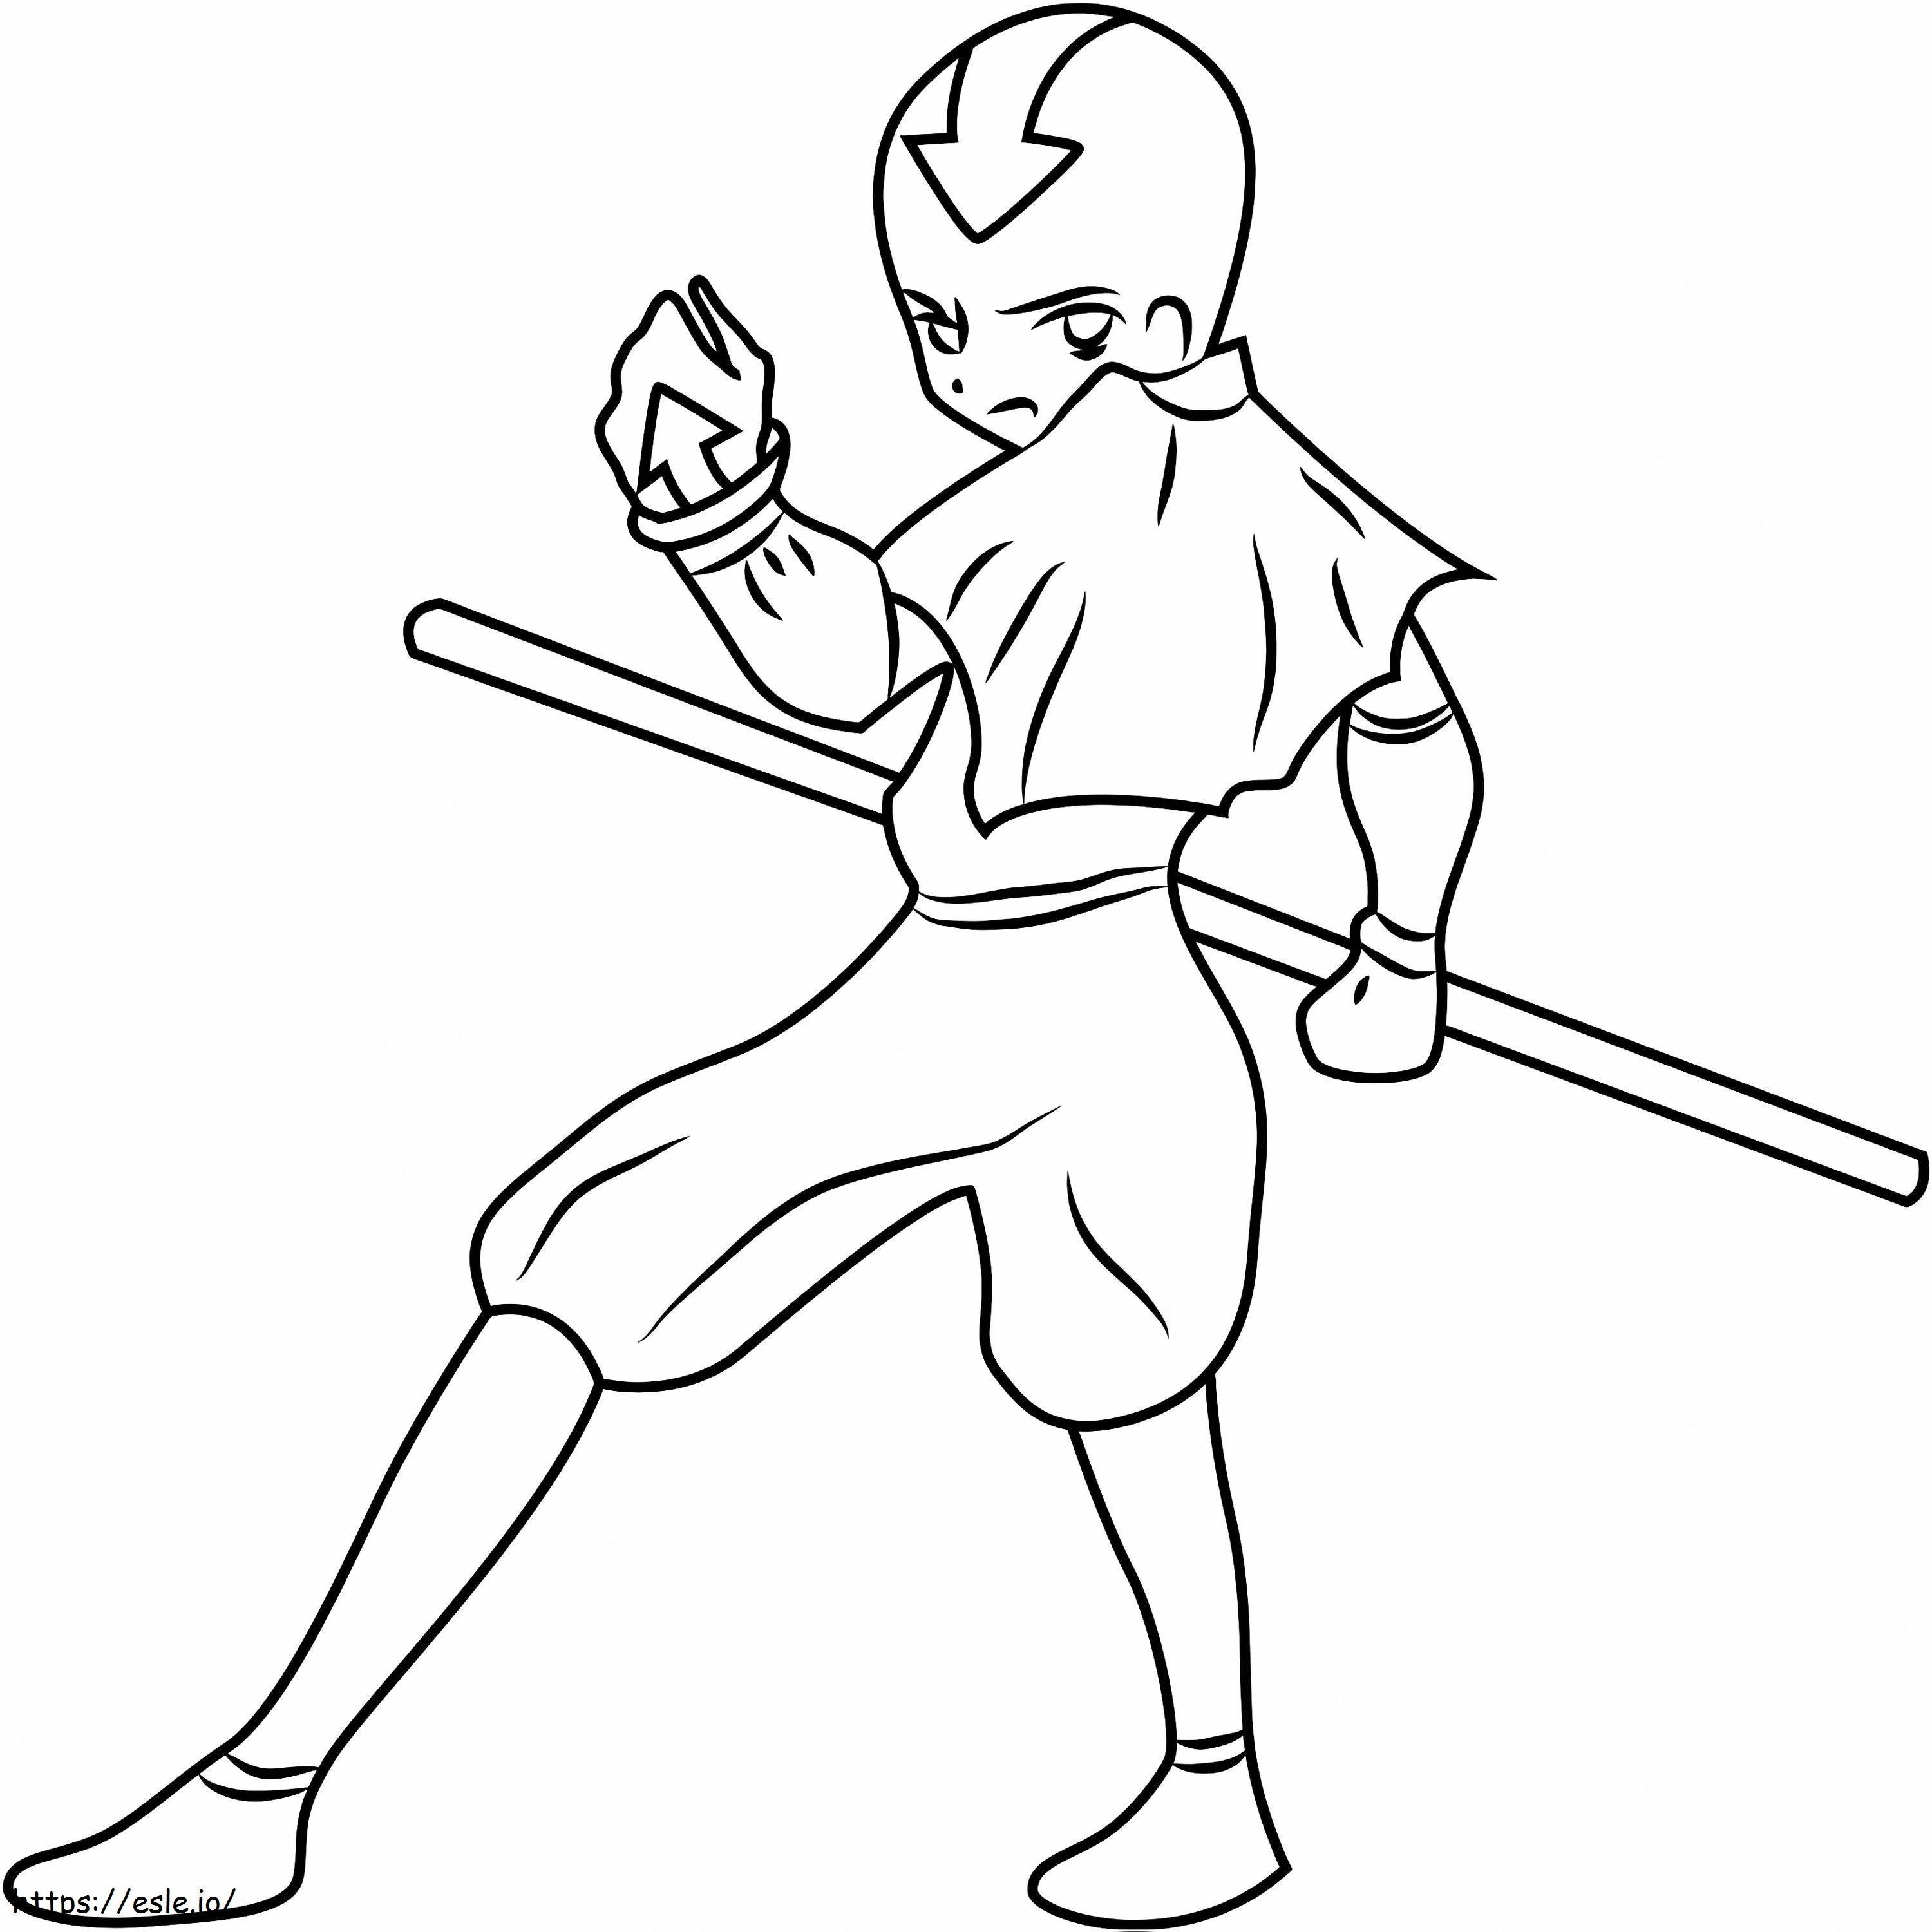 1532491157 Angry Aang A4 coloring page